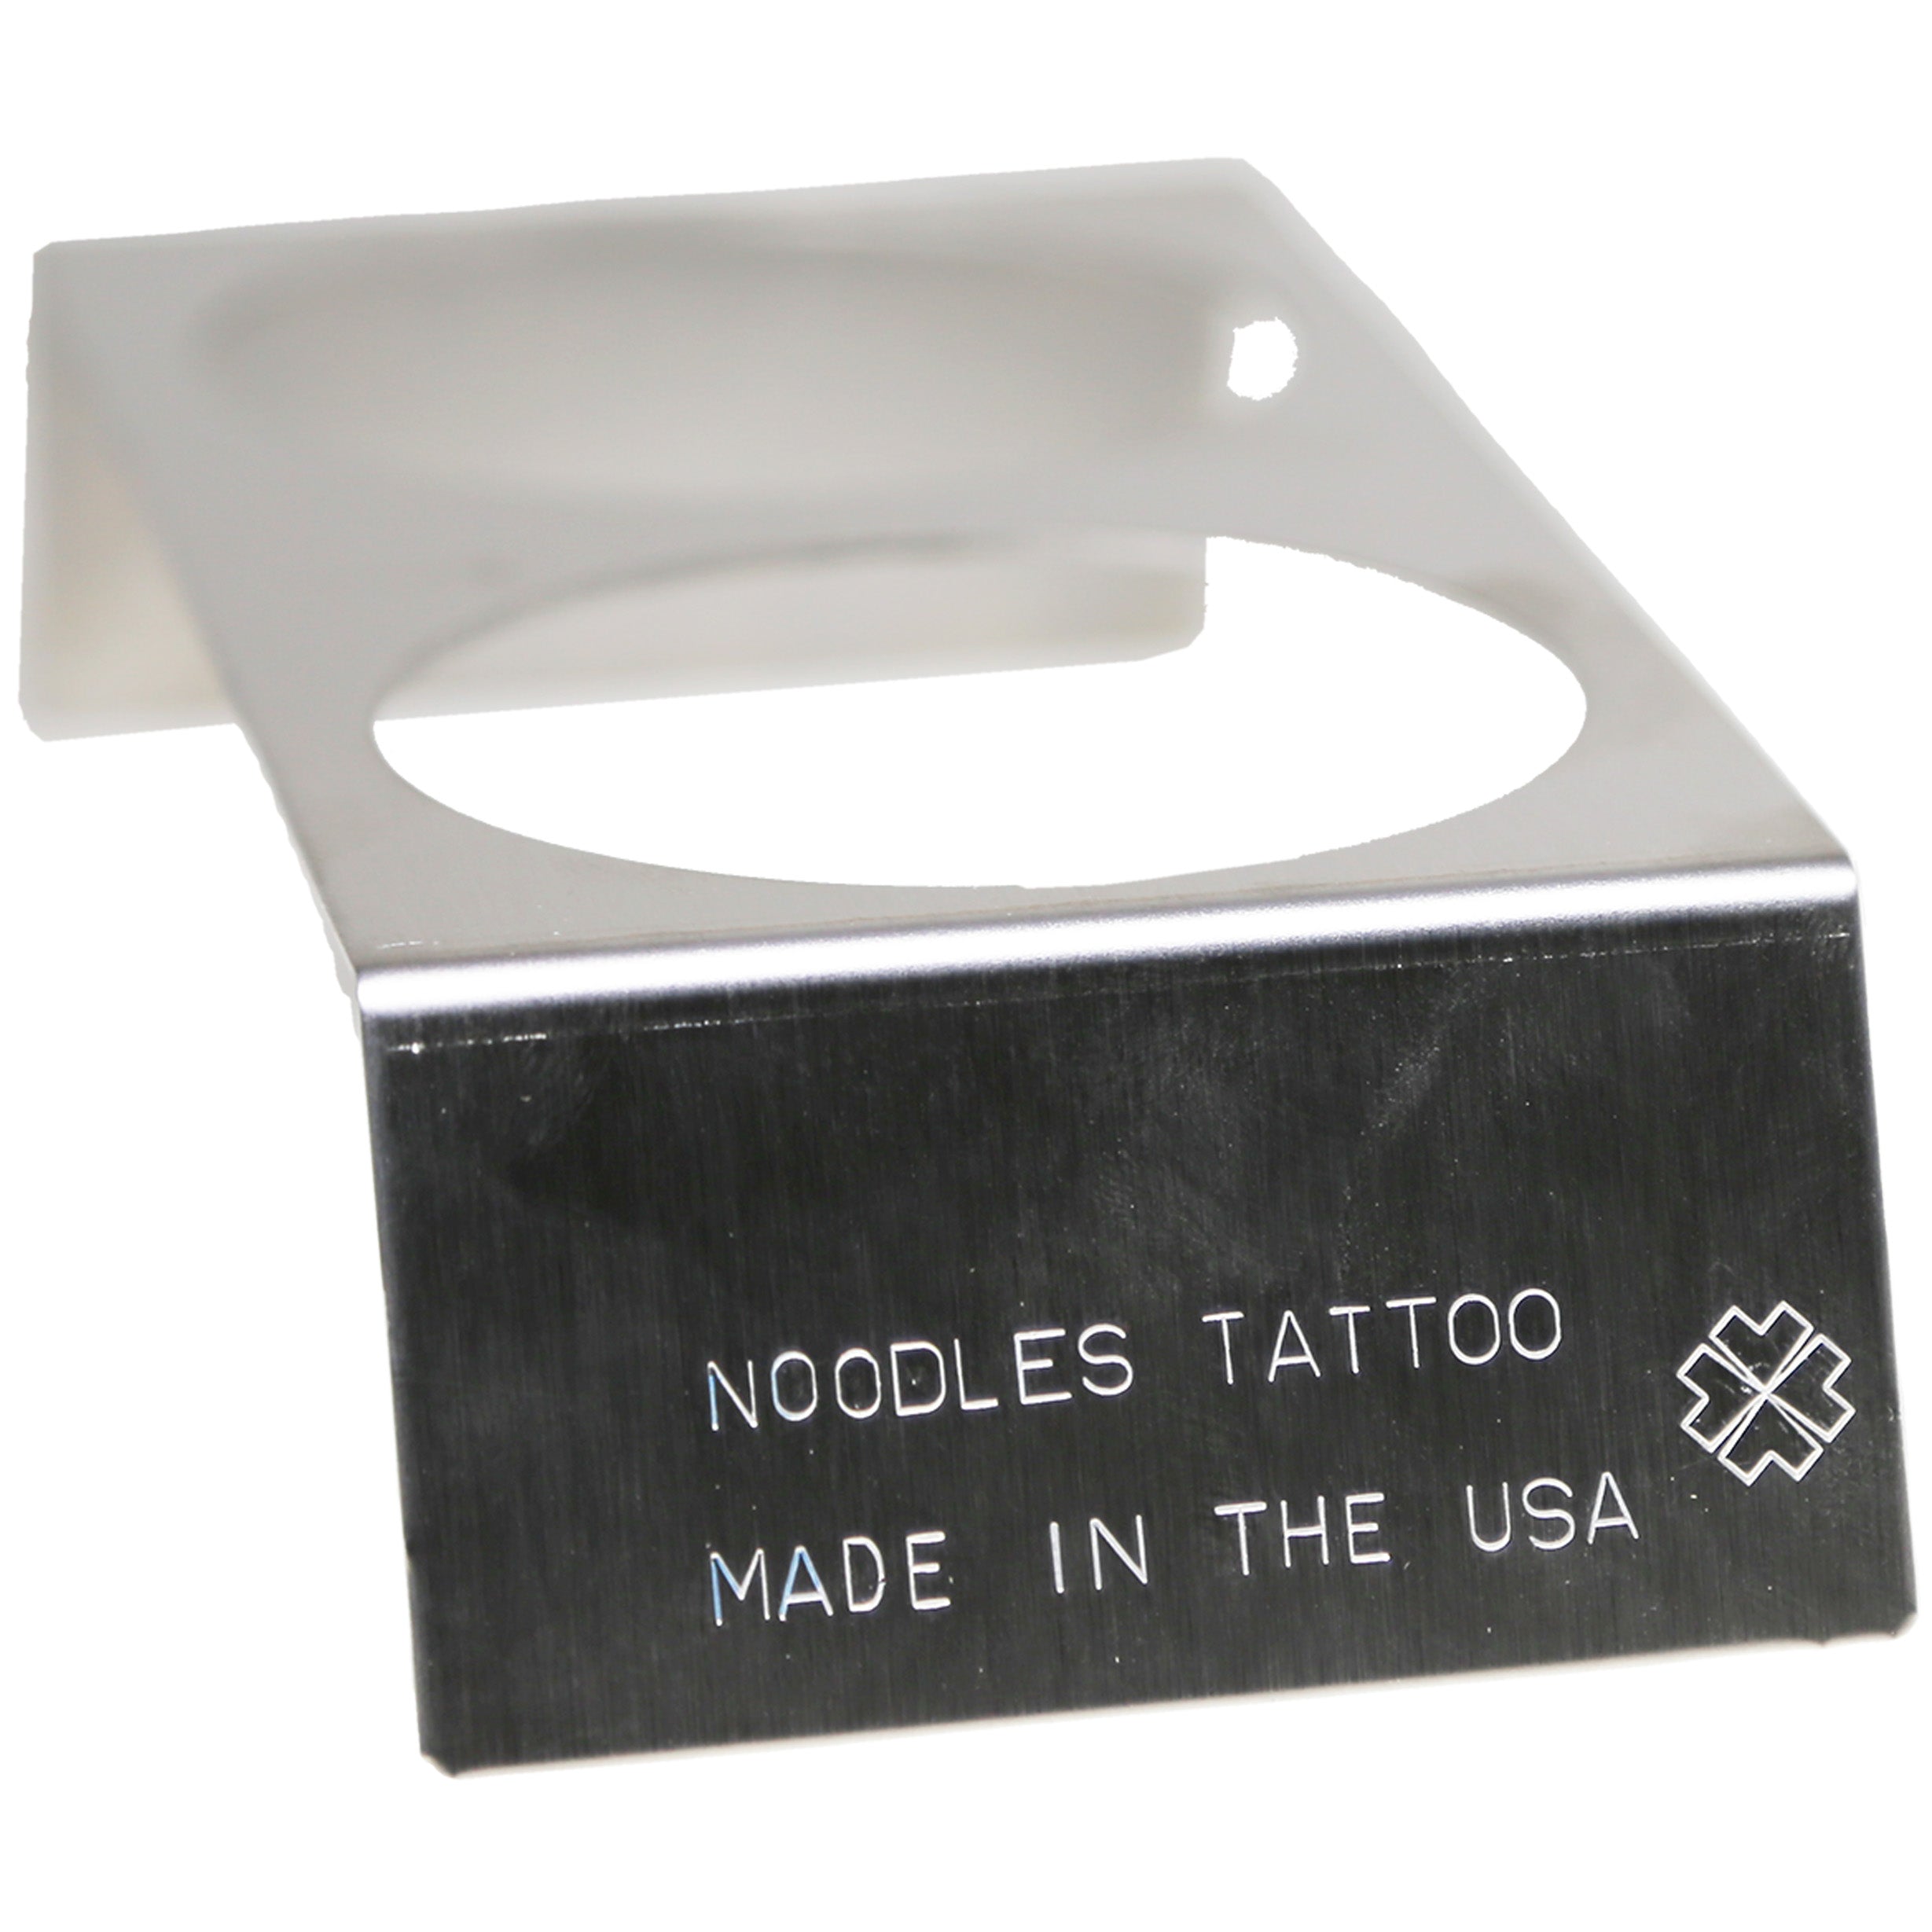 Rinse Cup Holders by Noodles Tattoos